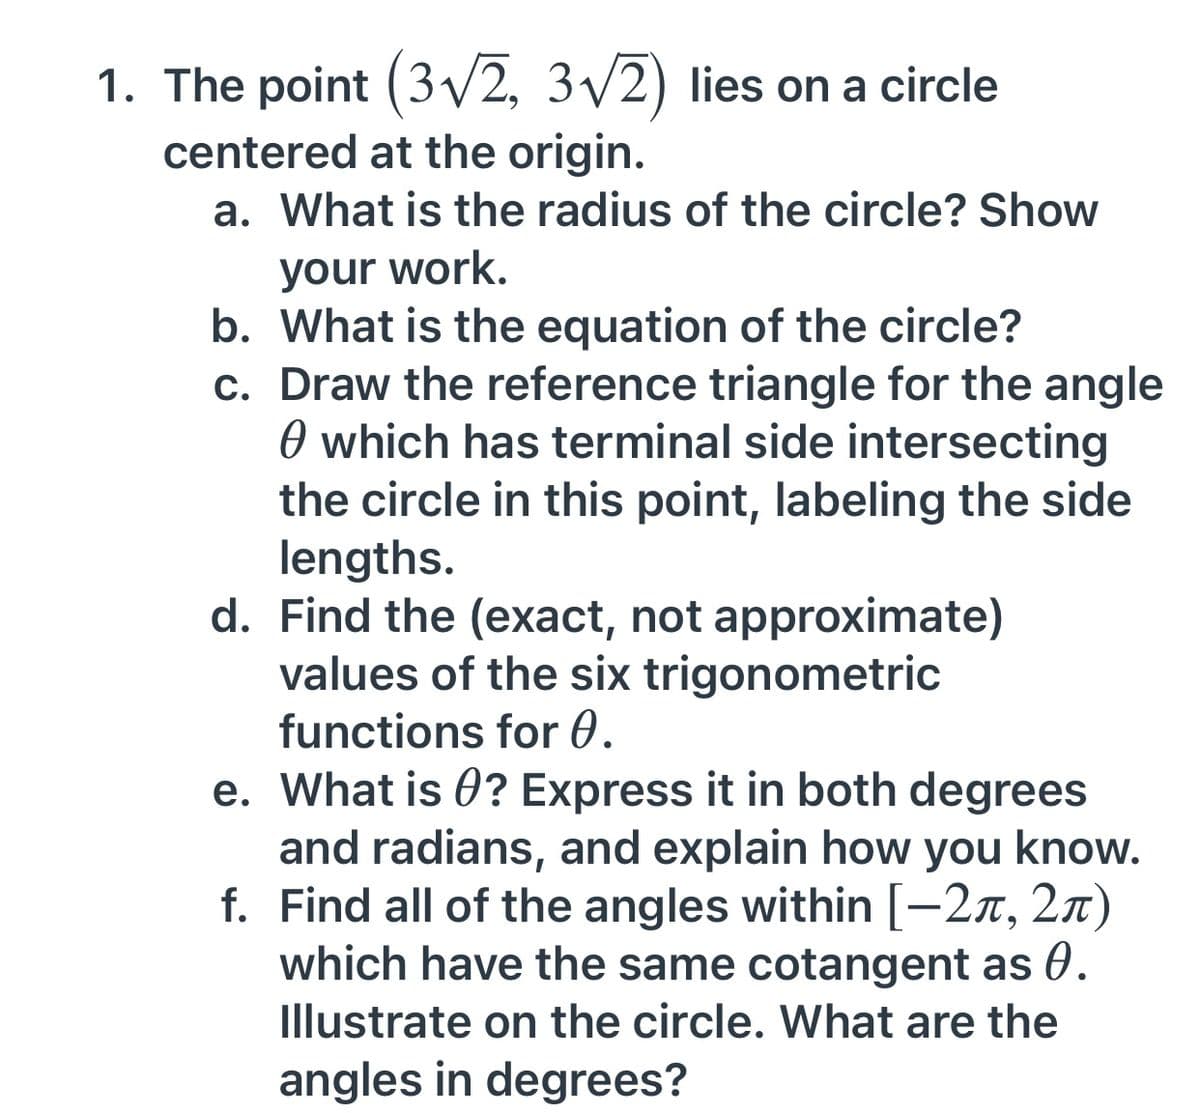 1. The point (3/2, 3/2) lies on a circle
centered at the origin.
a. What is the radius of the circle? Show
your work.
b. What is the equation of the circle?
c. Draw the reference triangle for the angle
O which has terminal side intersecting
the circle in this point, labeling the side
lengths.
d. Find the (exact, not approximate)
values of the six trigonometric
functions for 0.
e. What is 0? Express it in both degrees
and radians, and explain how you know.
f. Find all of the angles within [-2x, 2x)
which have the same cotangent as 0.
Illustrate on the circle. What are the
angles in degrees?
